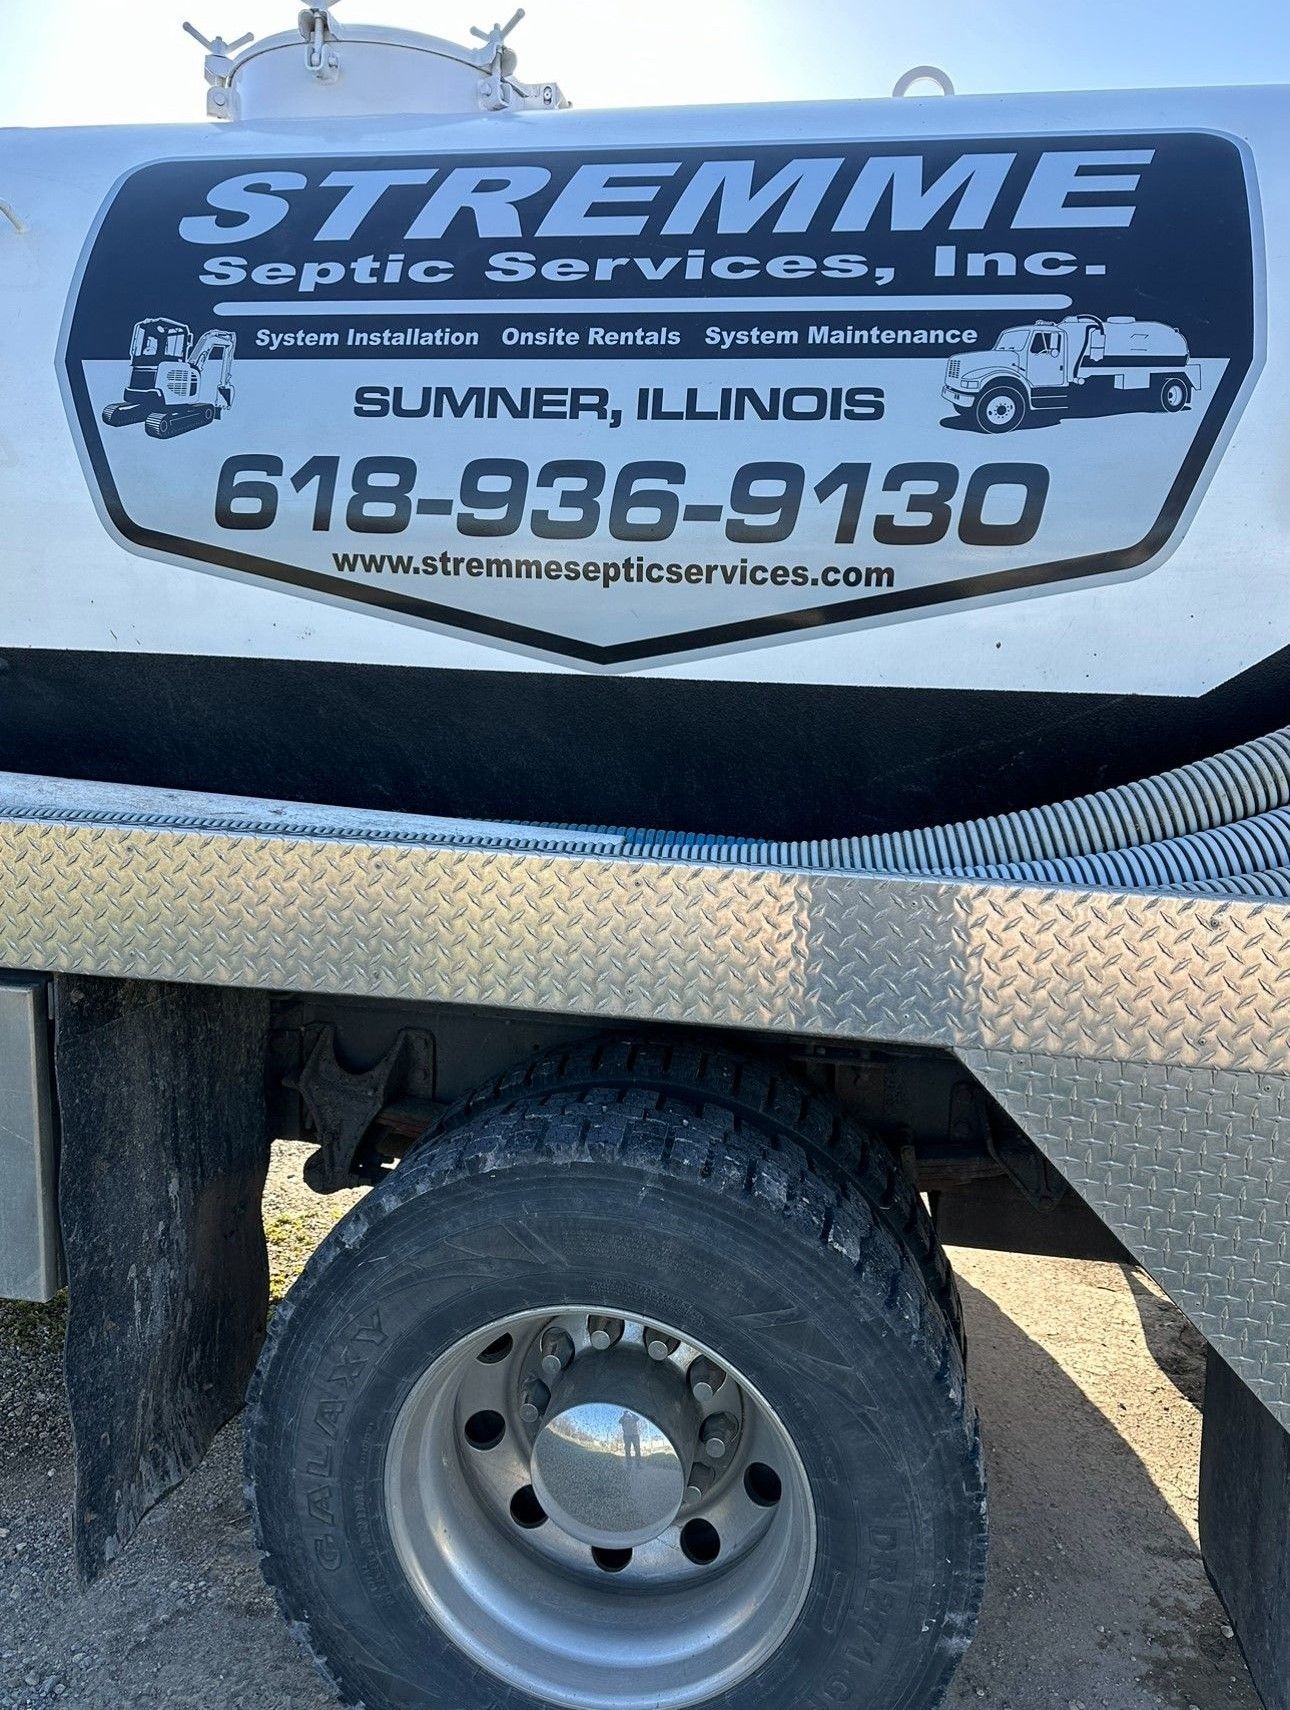 A Stremme Septic Services truck is parked on the side of the road